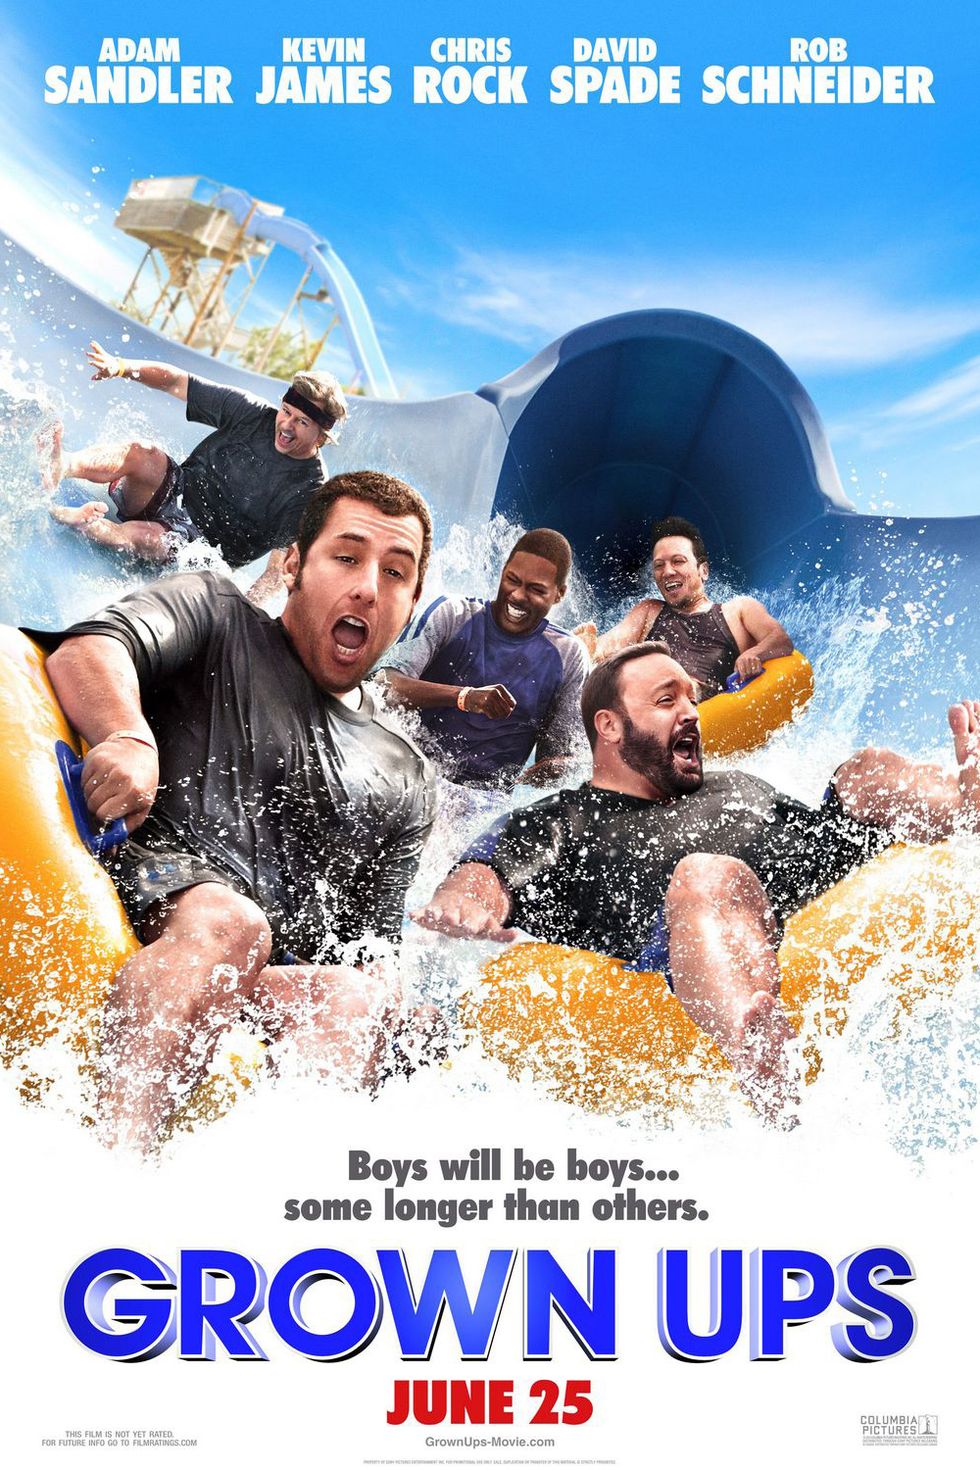 Movie, Poster, Fun, Leisure, Advertising, Water park, Photography, Comedy, Tourism, Album cover, 